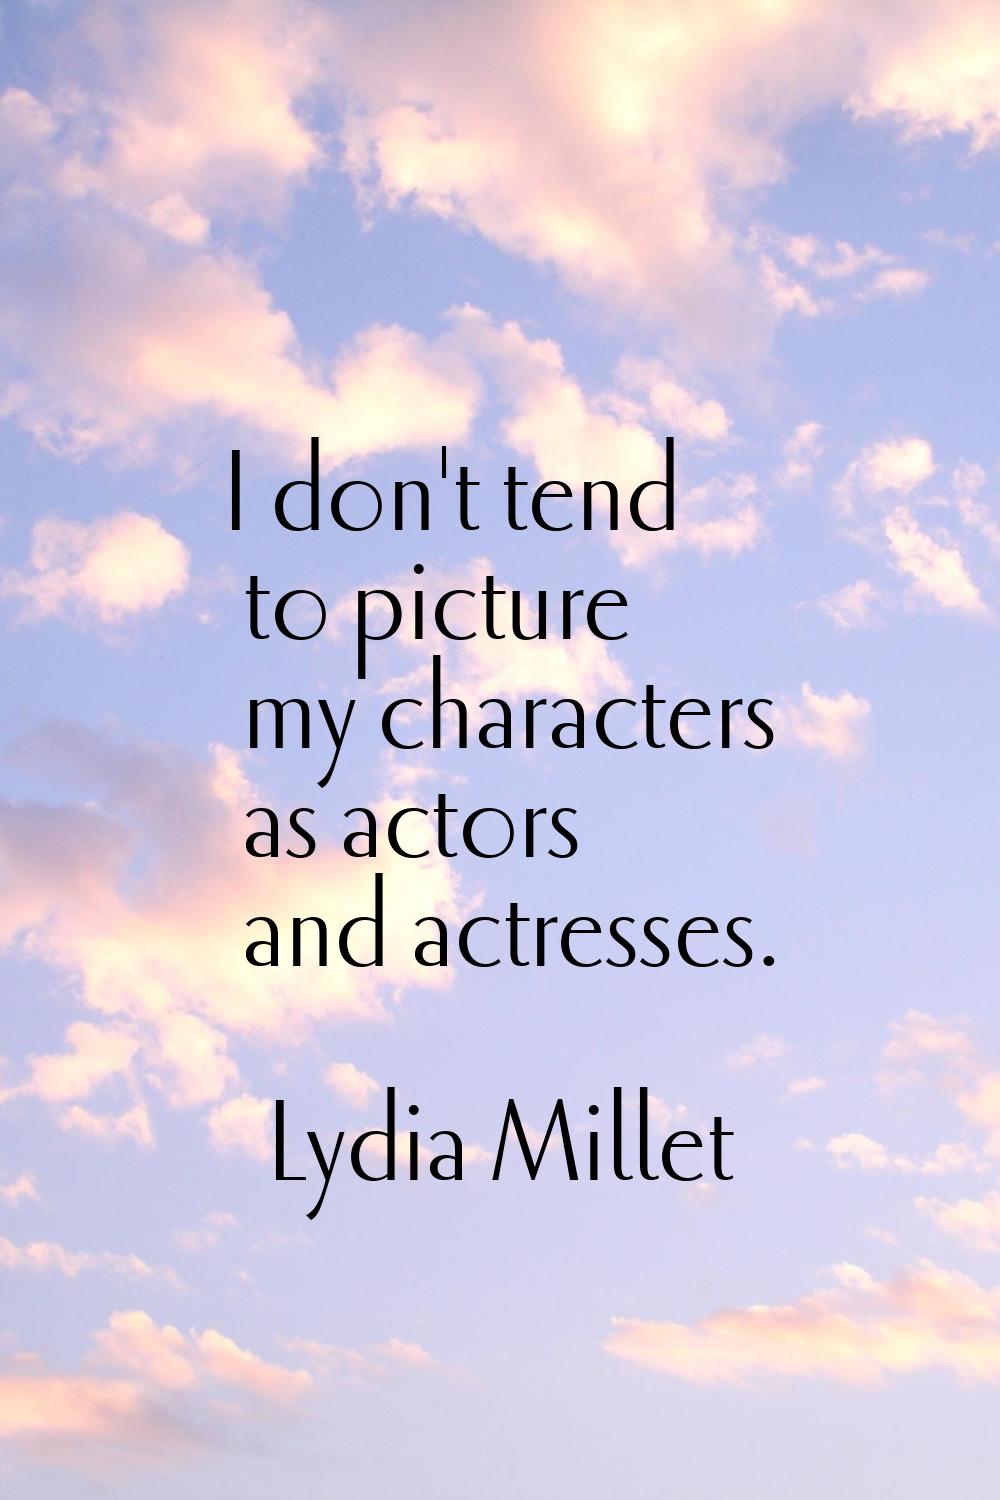 I don't tend to picture my characters as actors and actresses.